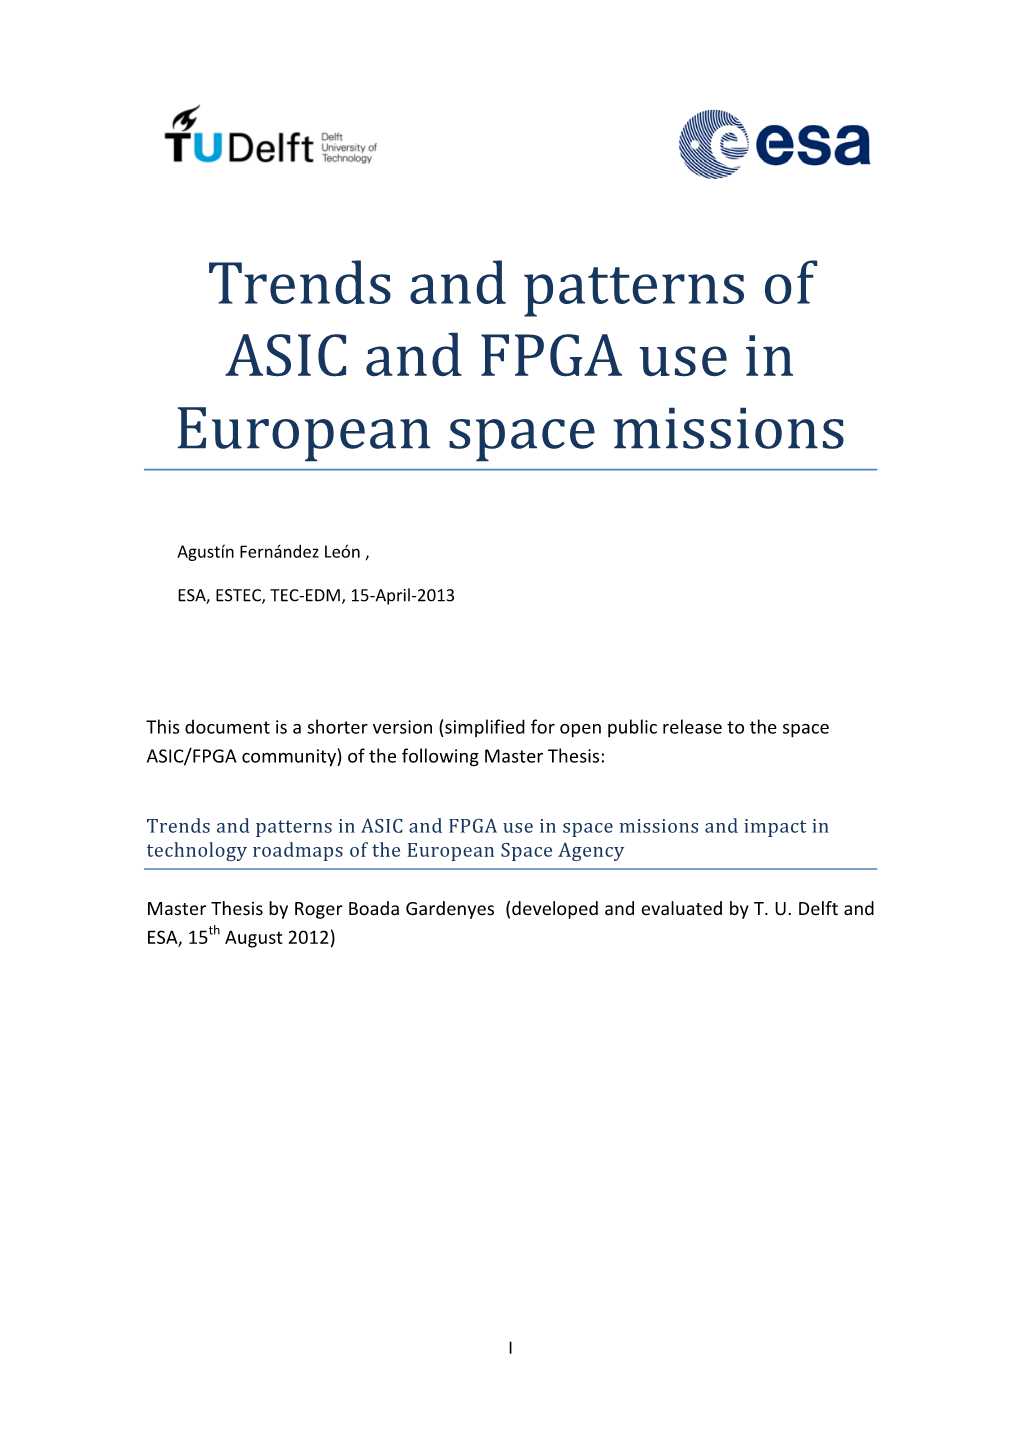 Trends and Patterns of ASIC and FPGA Use in European Space Missions